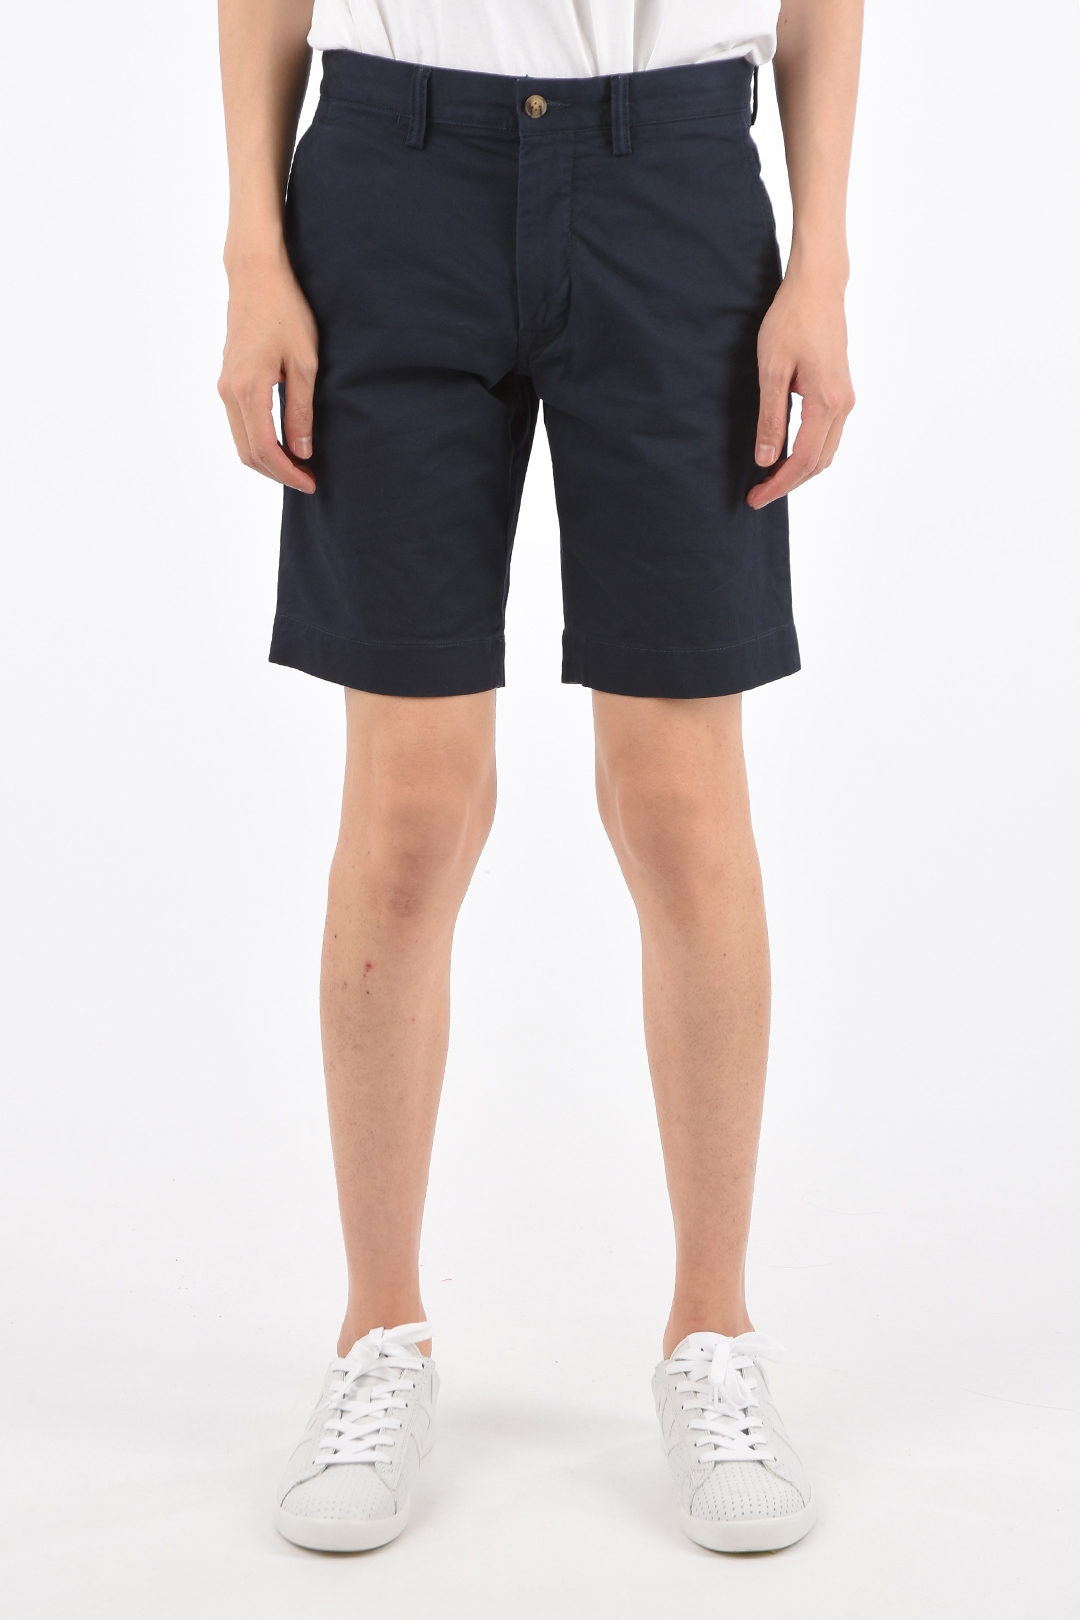 Stretch Cotton BEDFORD Slim Fit Chinos Shorts